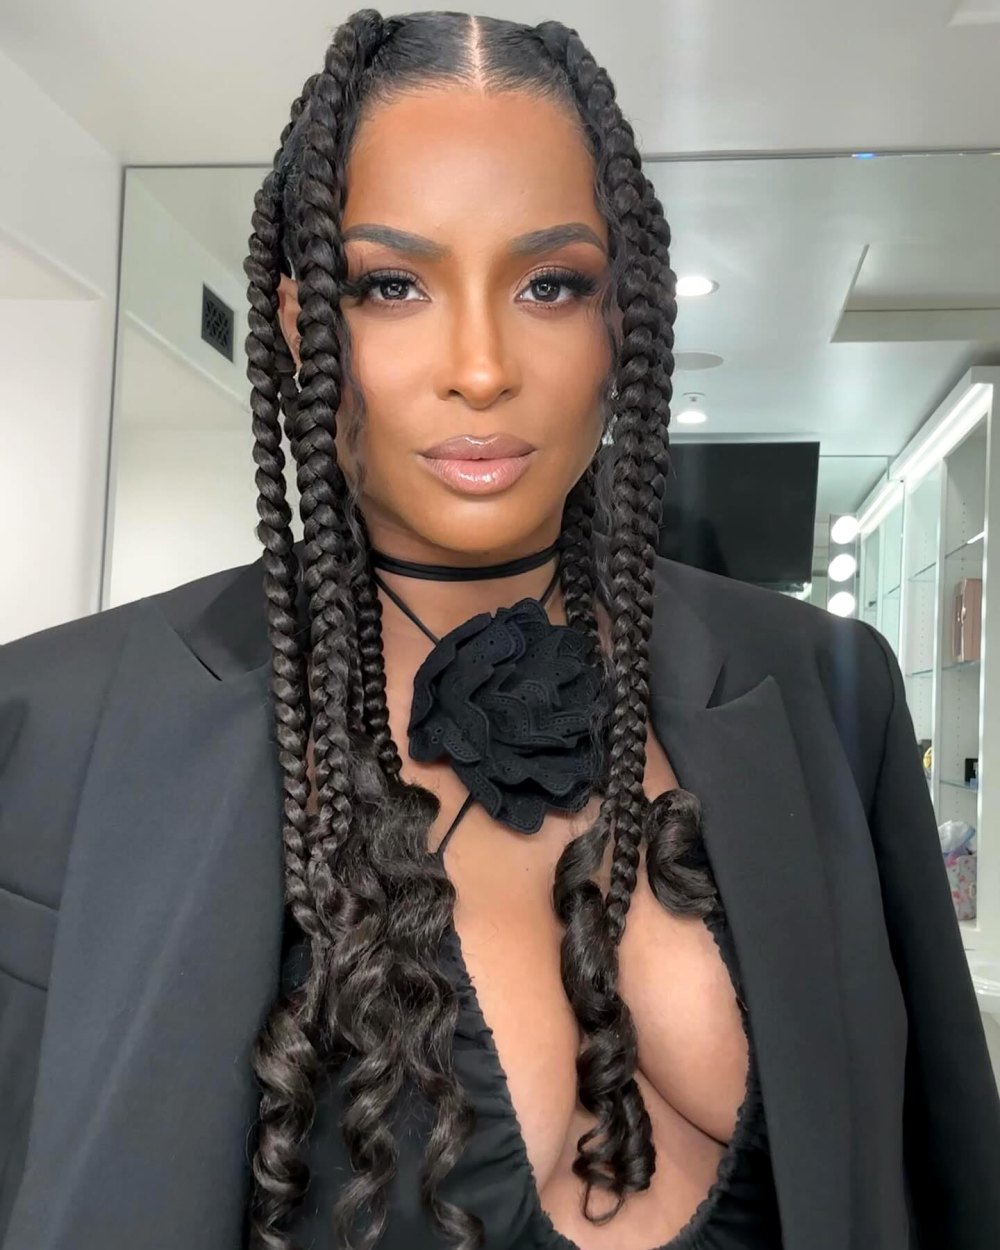 Ciara Is Fierce in Plunging Leather Dress Just Weeks After Having Baby: ‘I Still Got the Juice Boo’